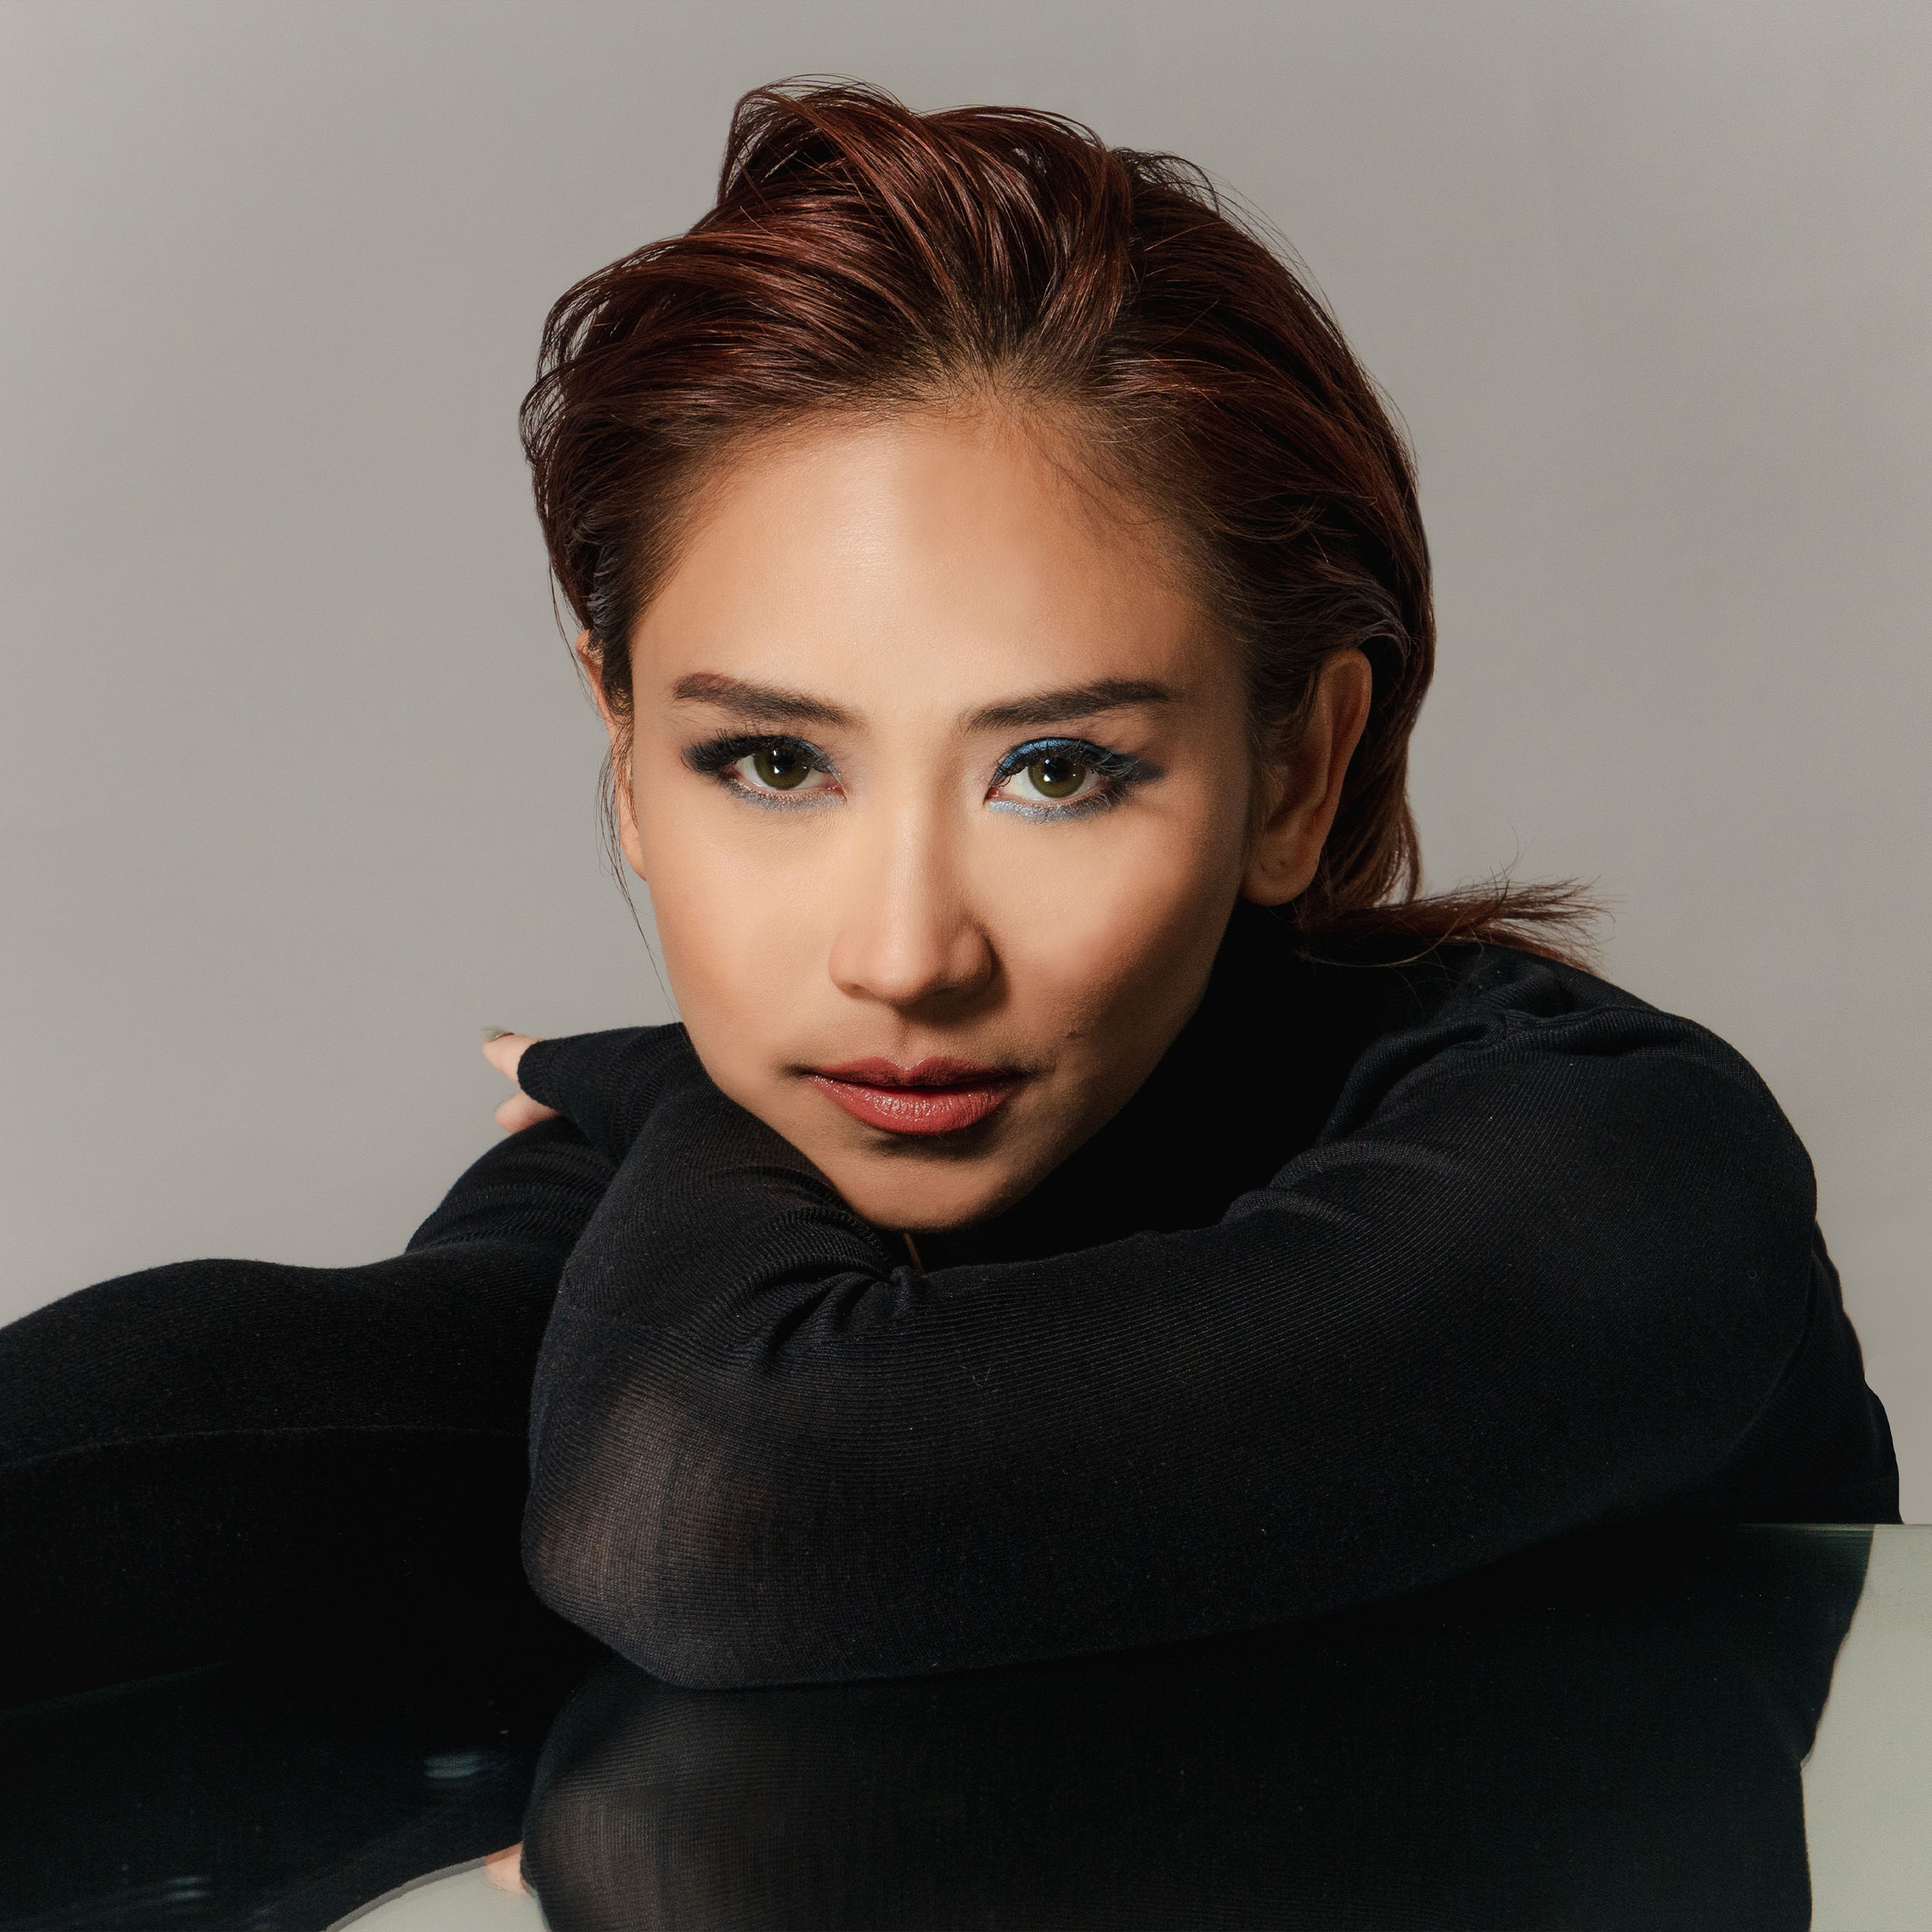 Sarah Geronimo Speaks Out on Her Growth as an Artist and Fangirling Over SB19